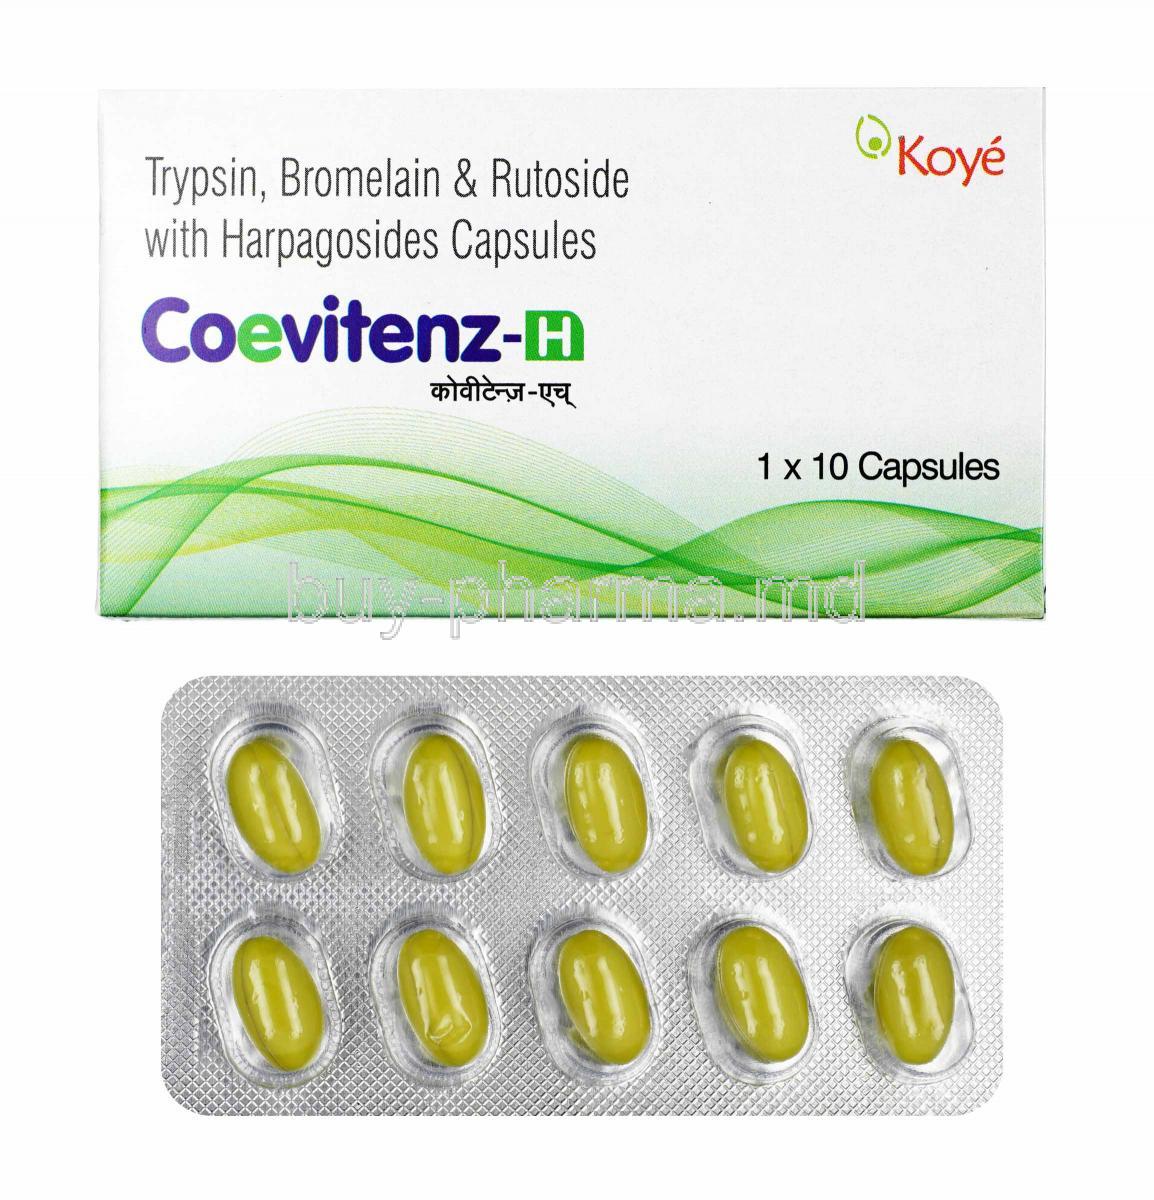 Coevitenz-H, Bromelain, Trypsin and Rutoside box and capsules